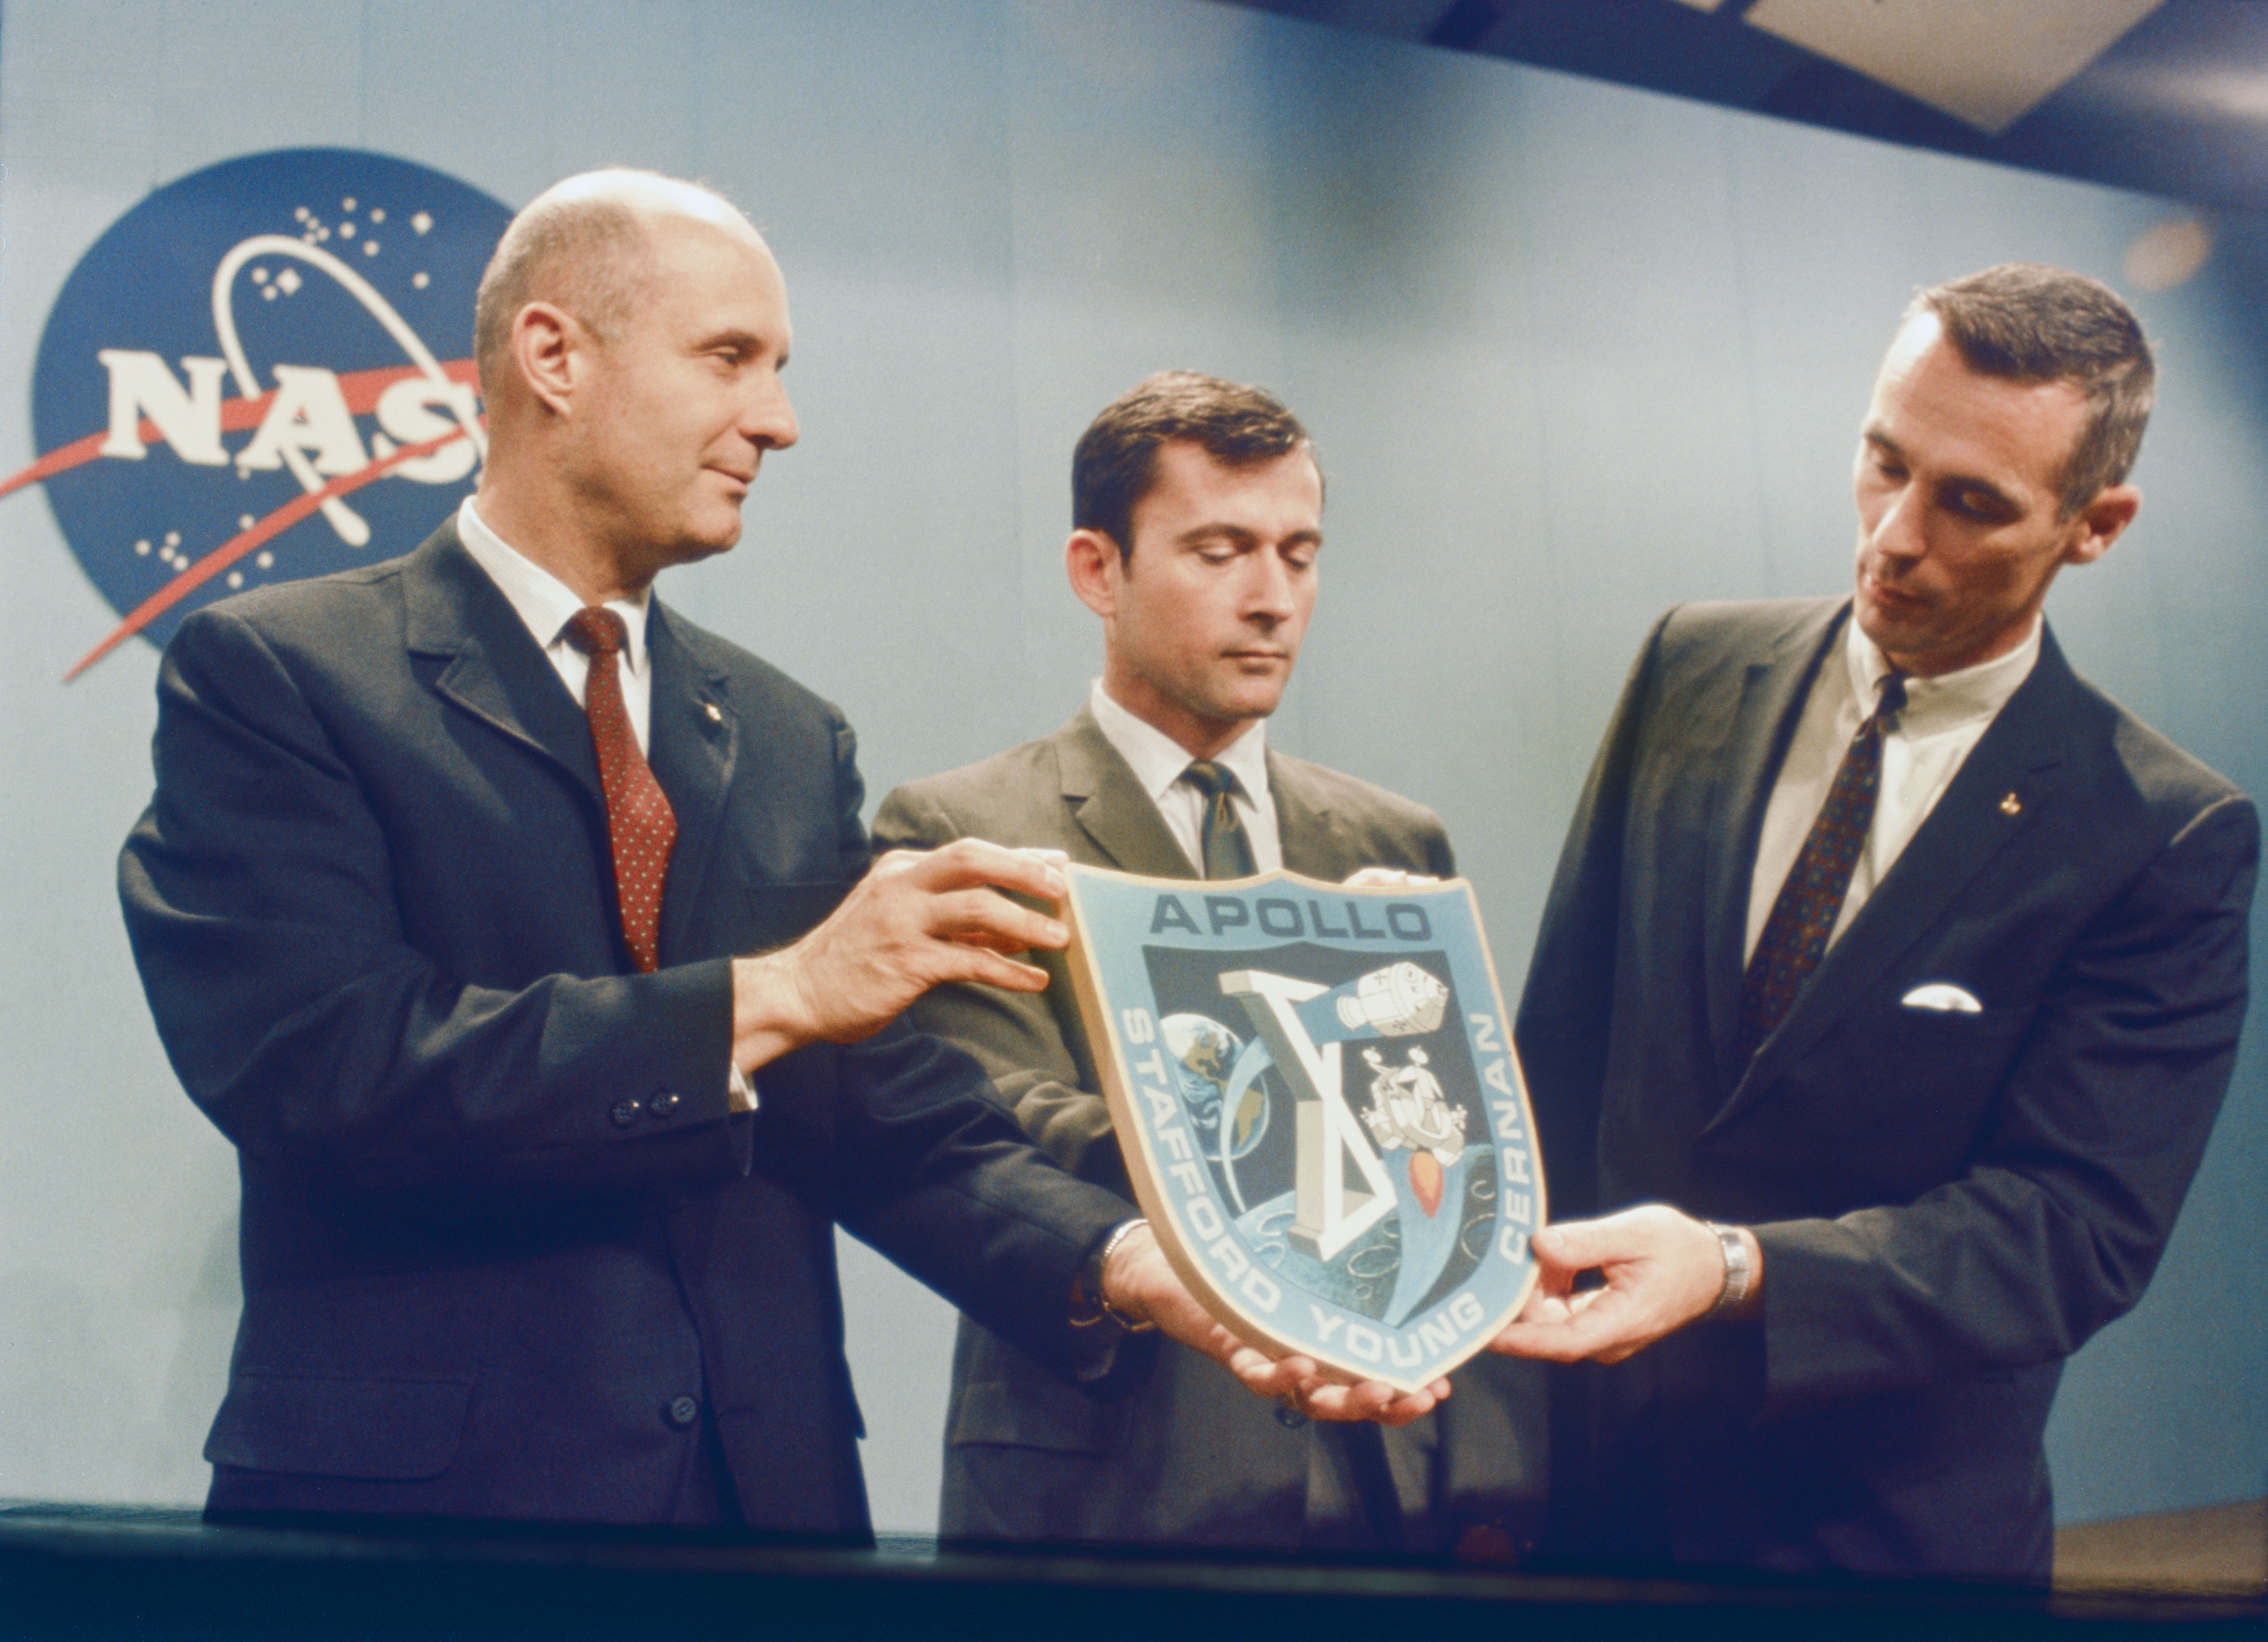 Stafford, left, Young, and Cernan hold their mission patch following a press conference at the Manned Spacecraft Center, now NASA’s Johnson Space Center in Houston